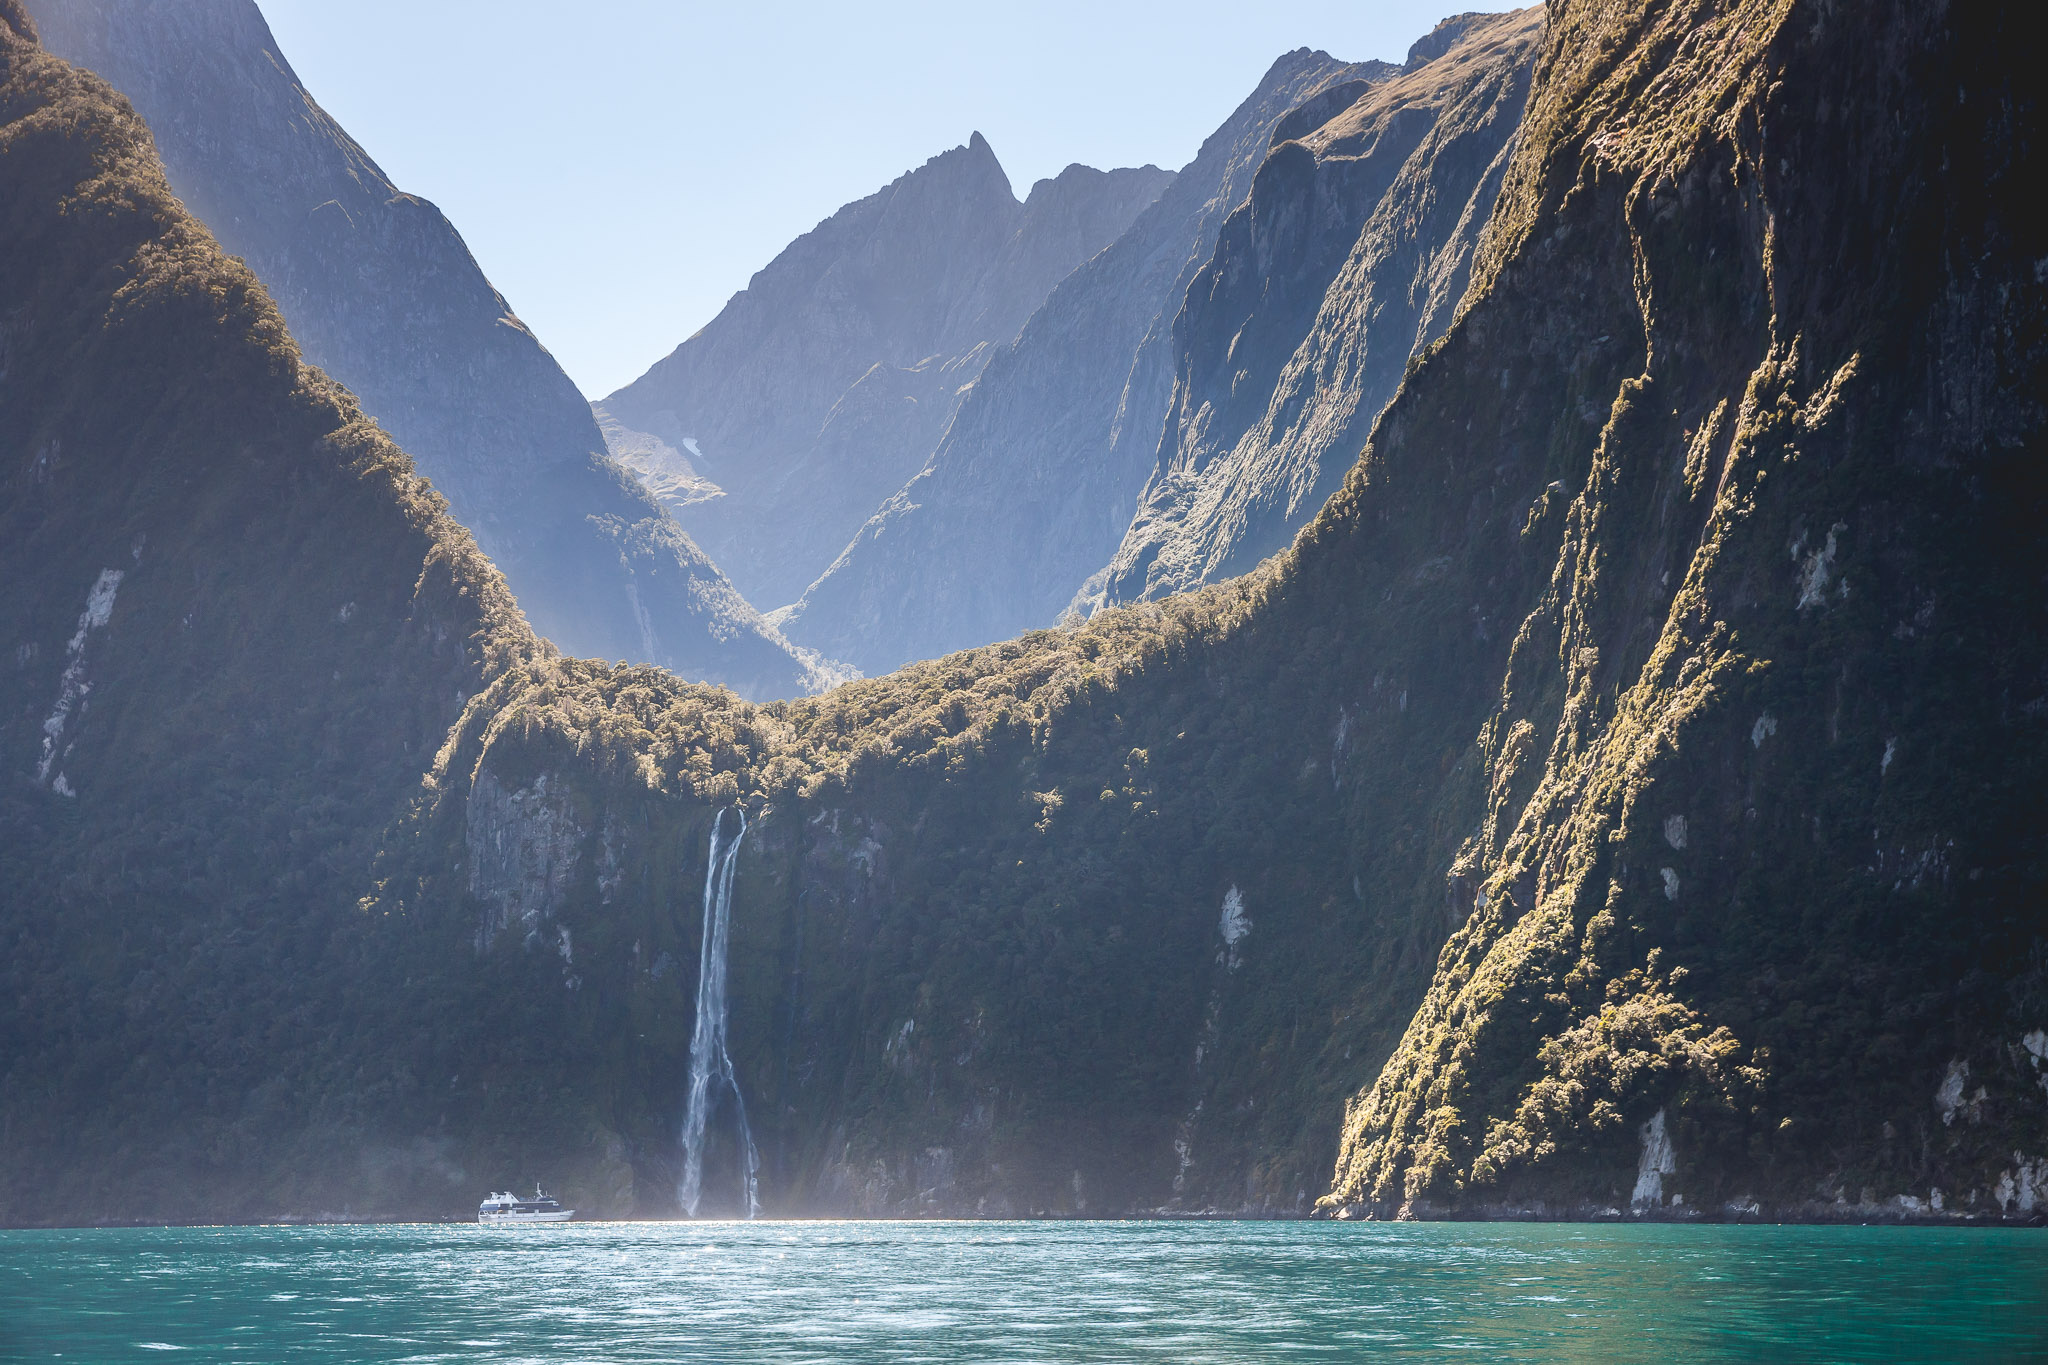 Boat in distance approaching waterfall in Milford Sound